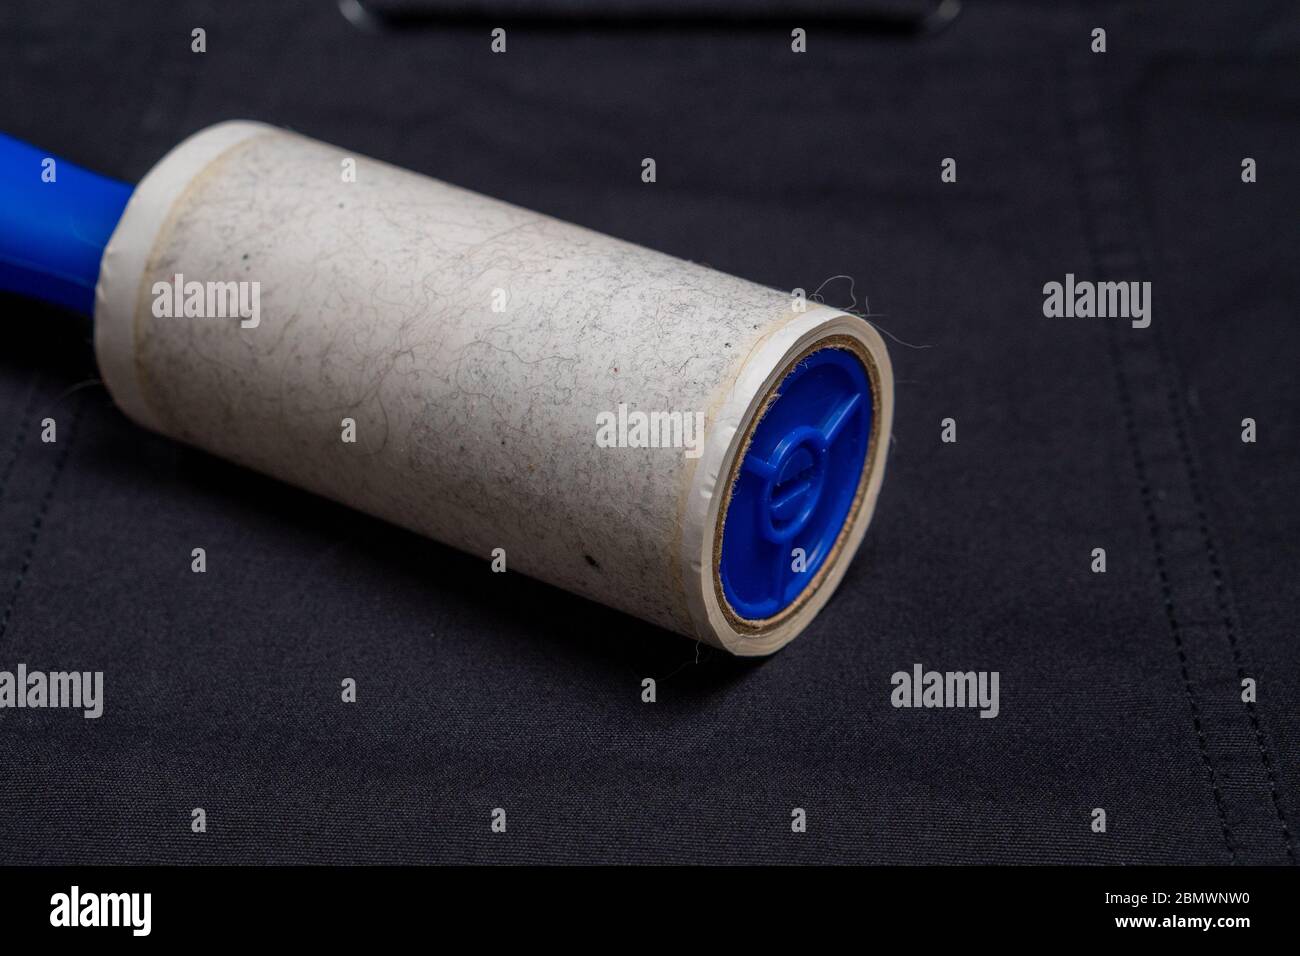 Adhesive roller for cleaning cloth on a black cloth, closeup Stock Photo